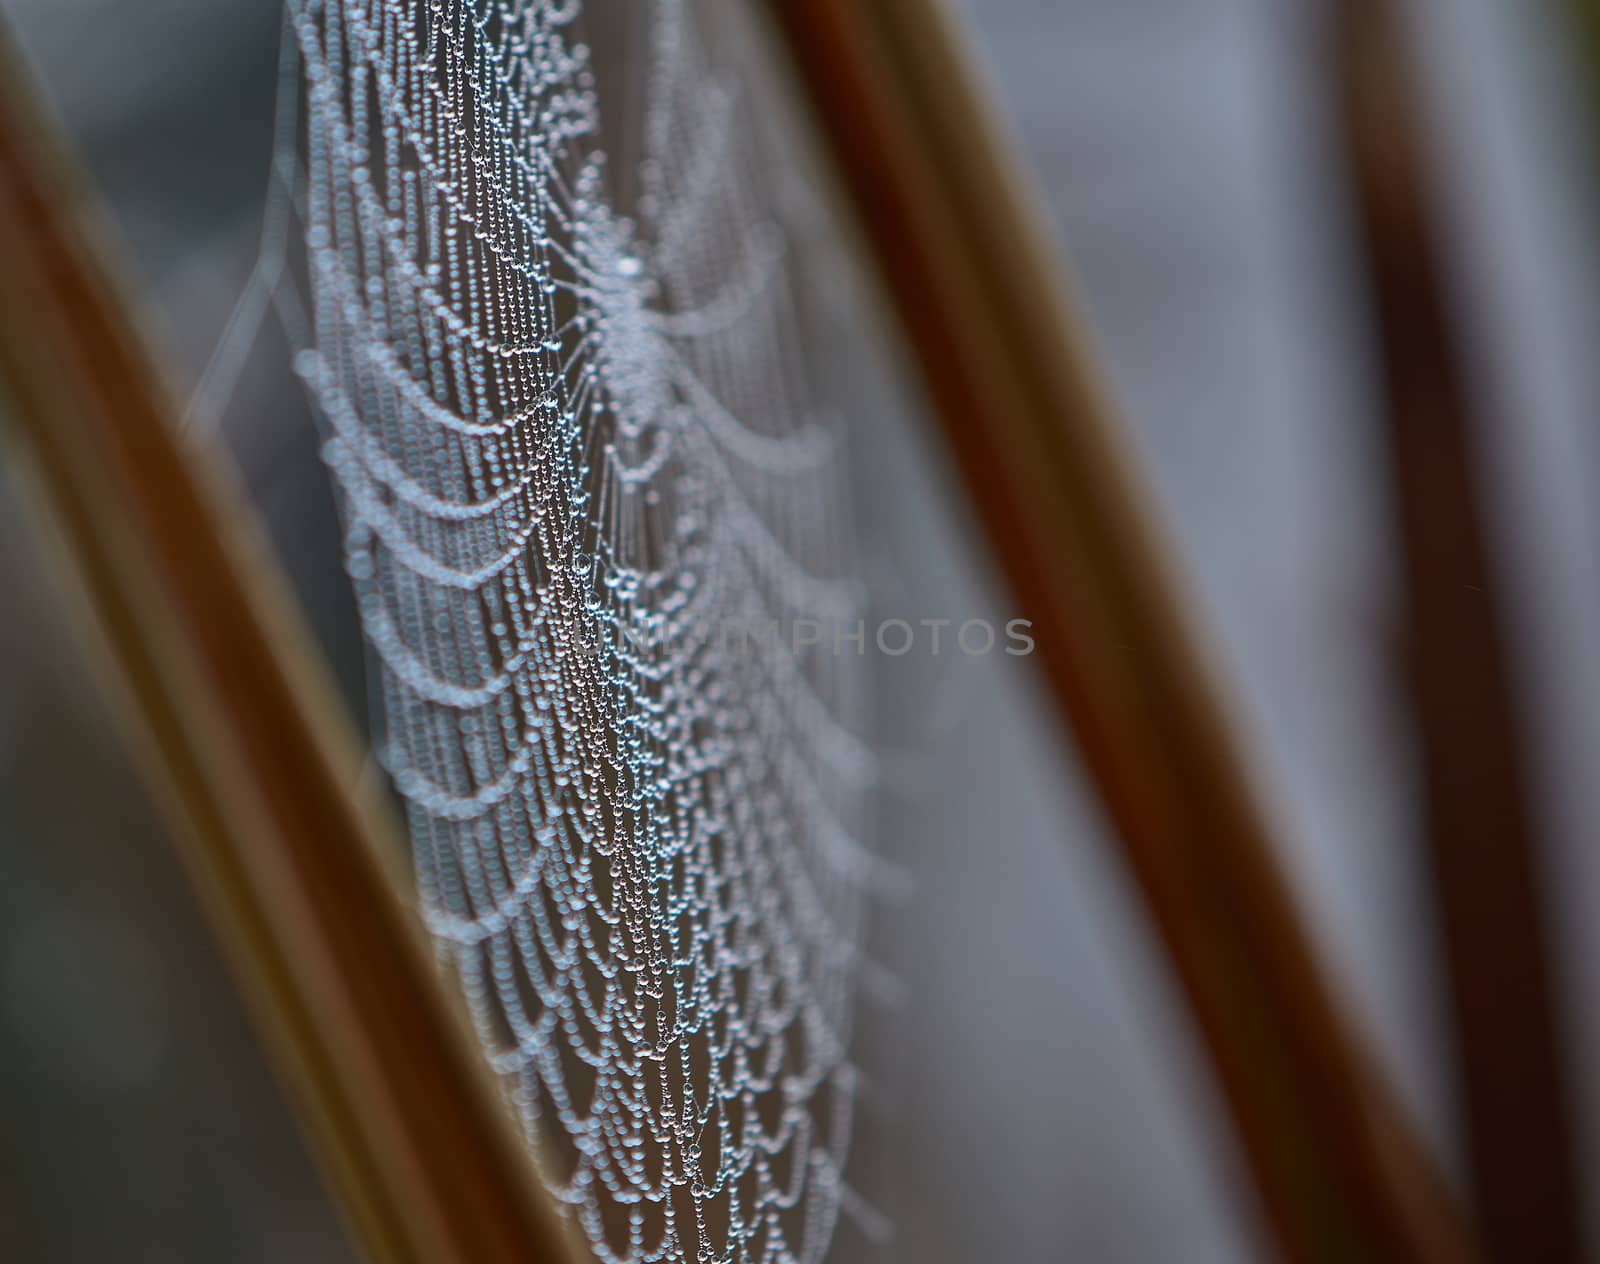 Spider webs between the branches of the trees covered with morning dew drops. Morning dew covering the vegetation. Image of nature and garden.